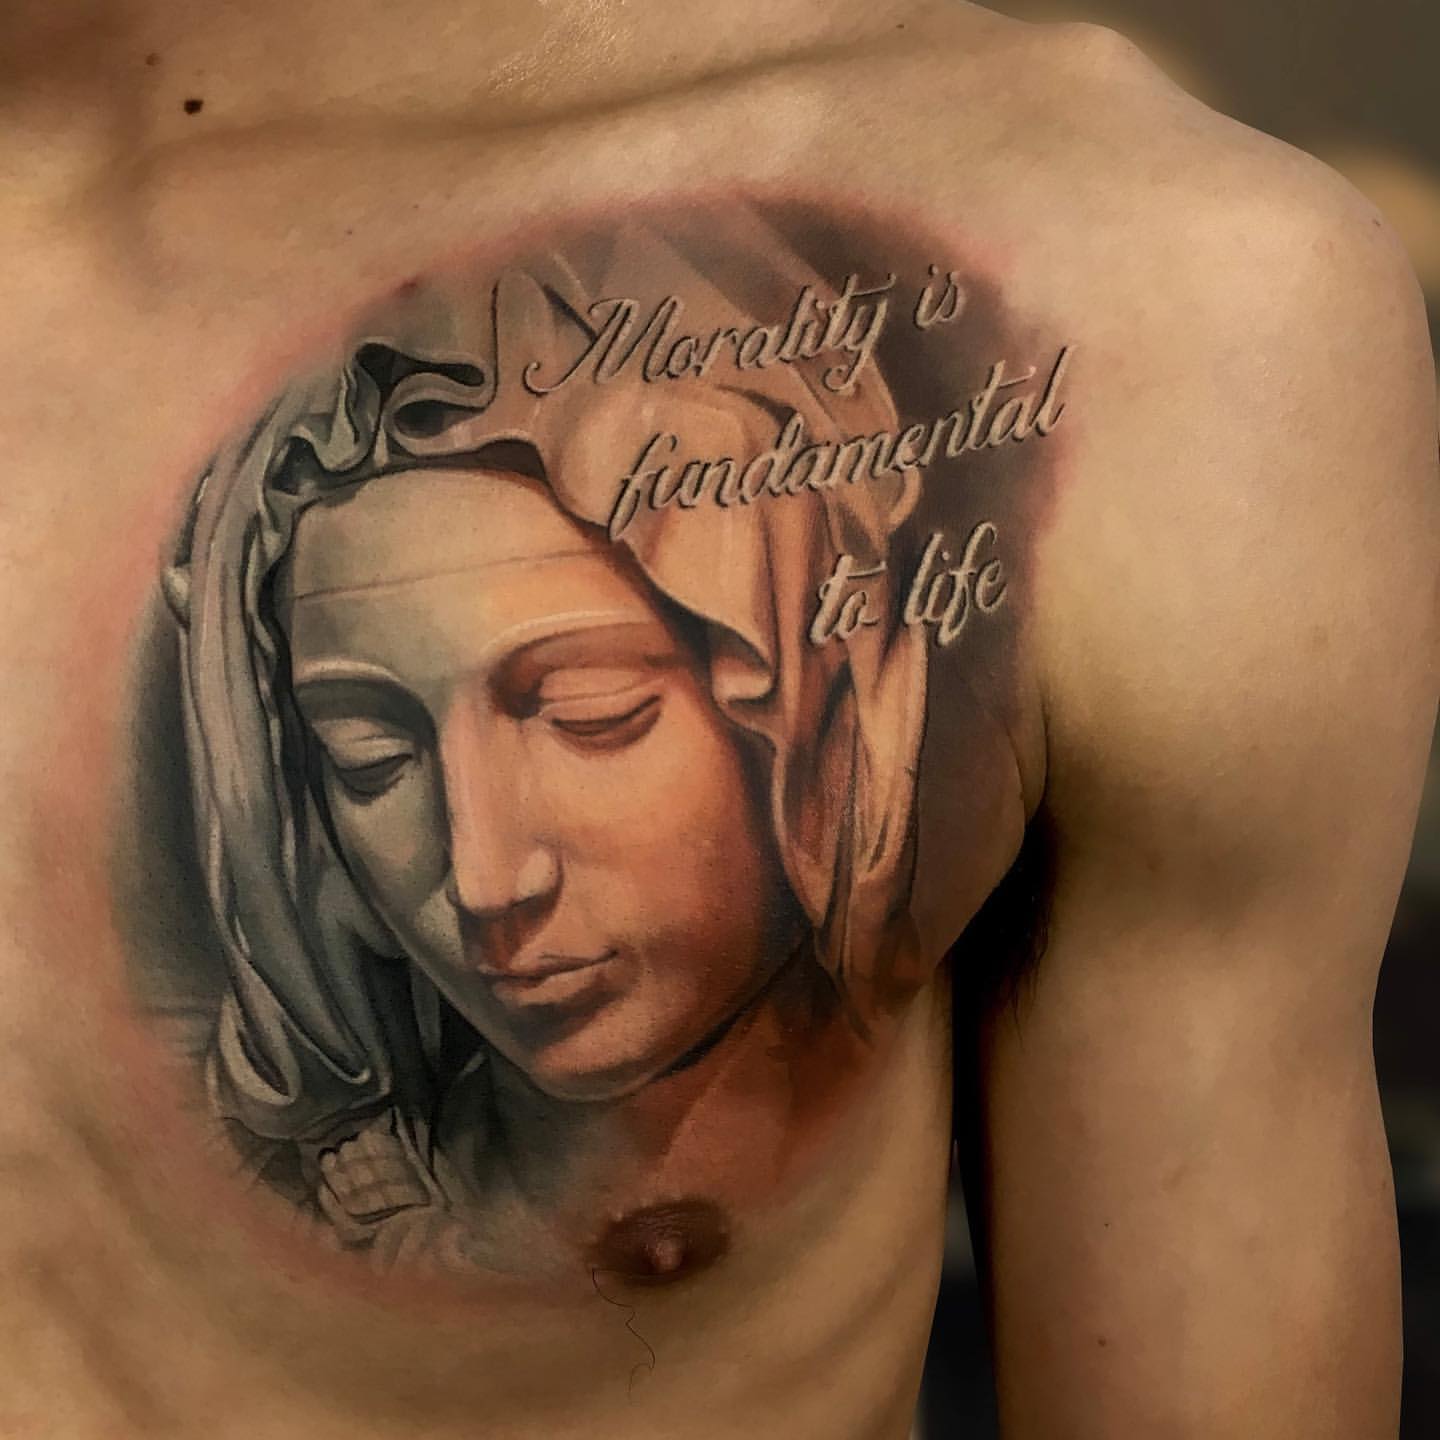 Christian tattoos to be offered by Catholic group for a great reason